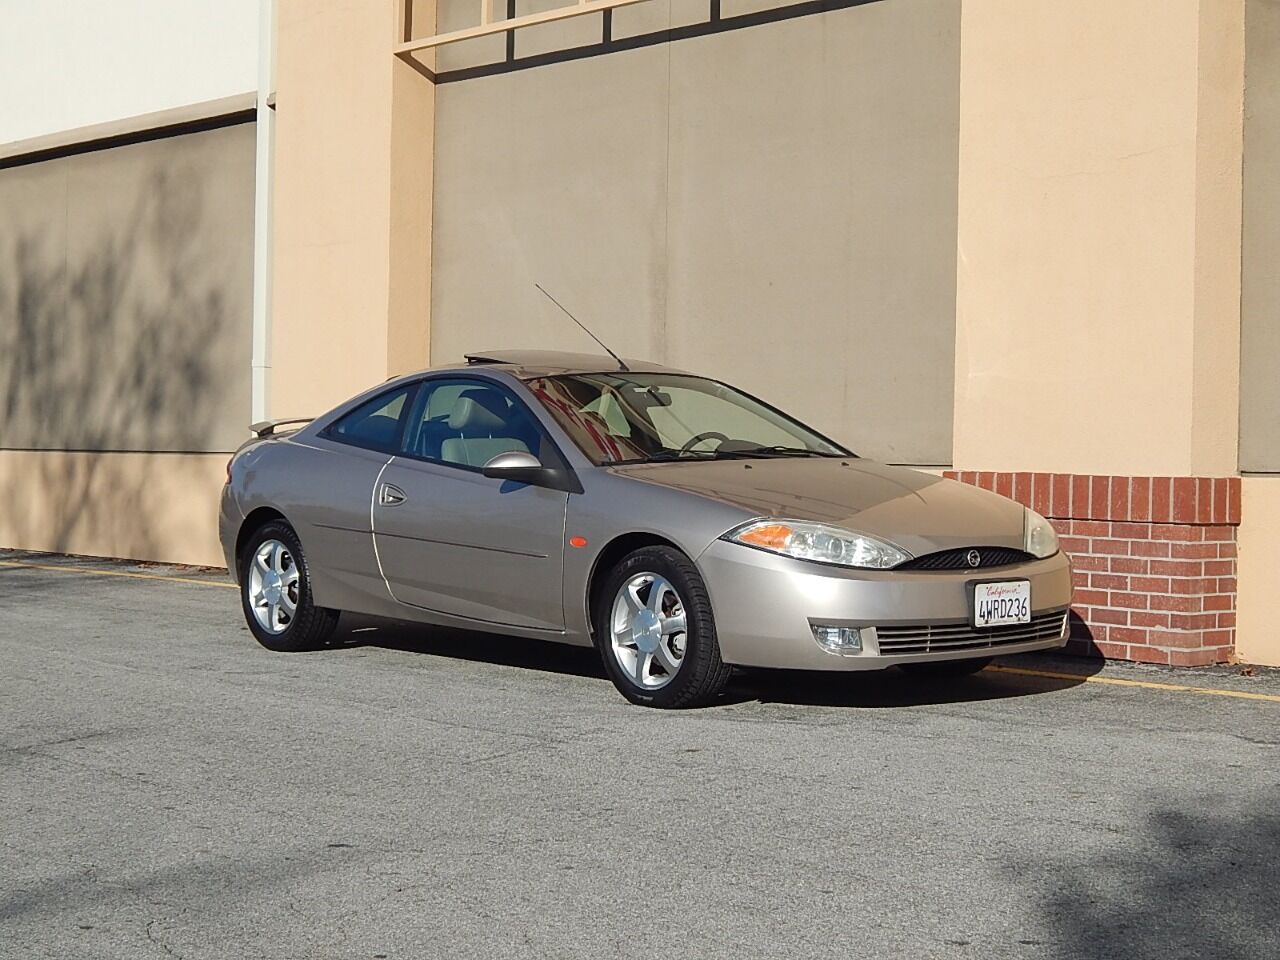 2002 Mercury Cougar For Sale In Poughkeepsie, NY - Carsforsale.com®